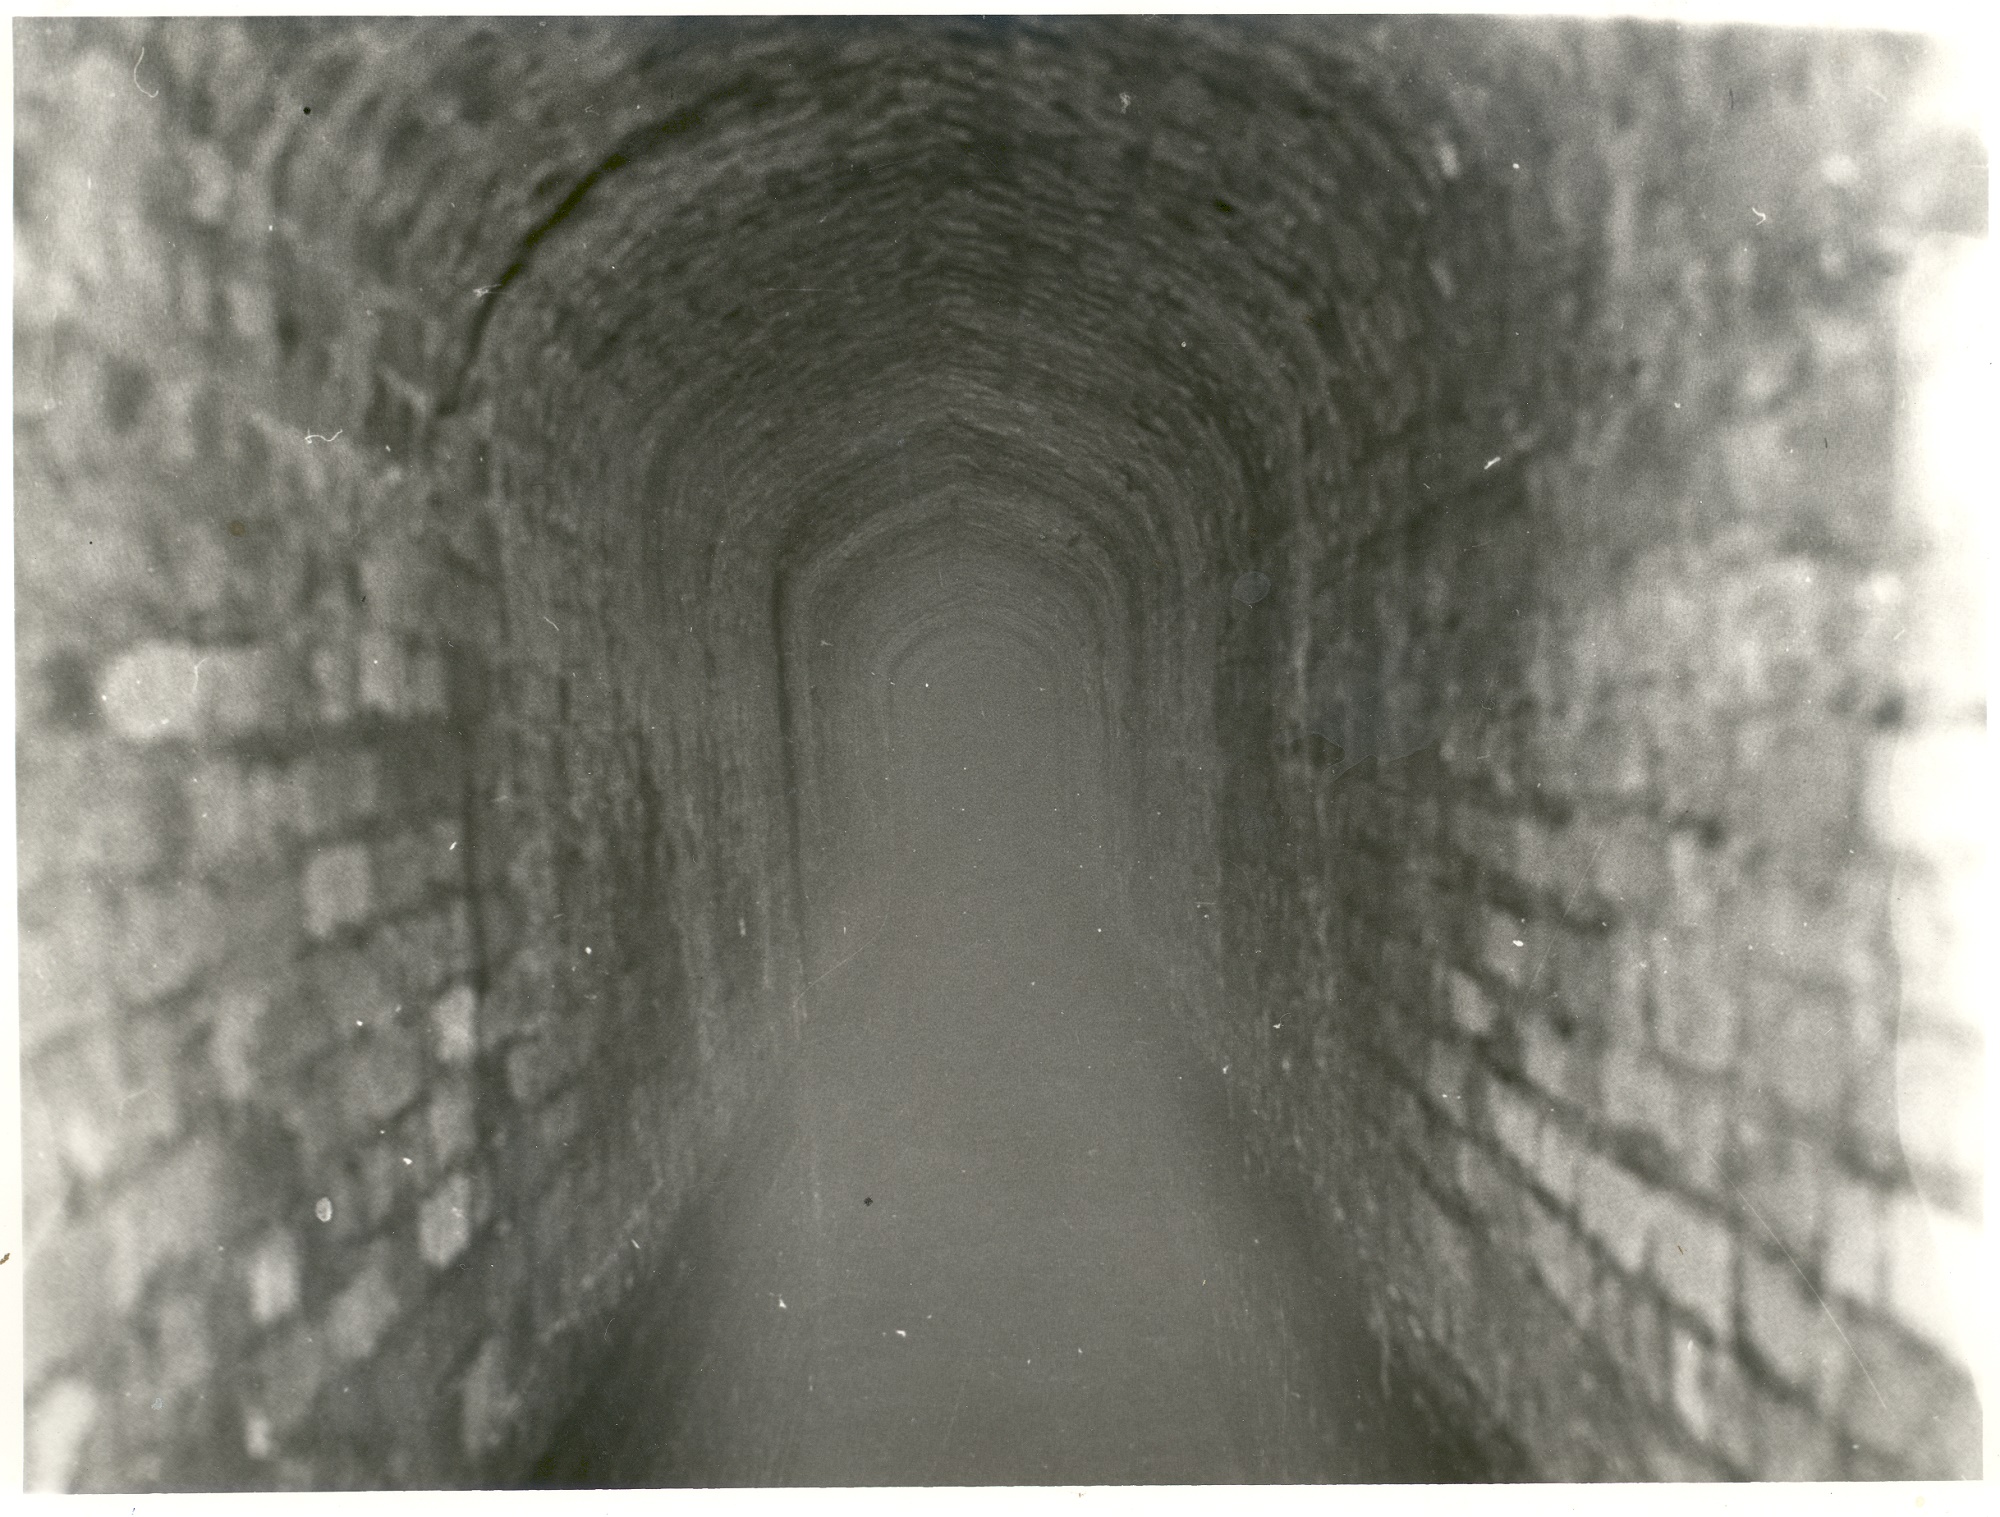 1920s black and white photograph of the interior of the Great Culvert which was inserted into the moat of Oatlands Palace.